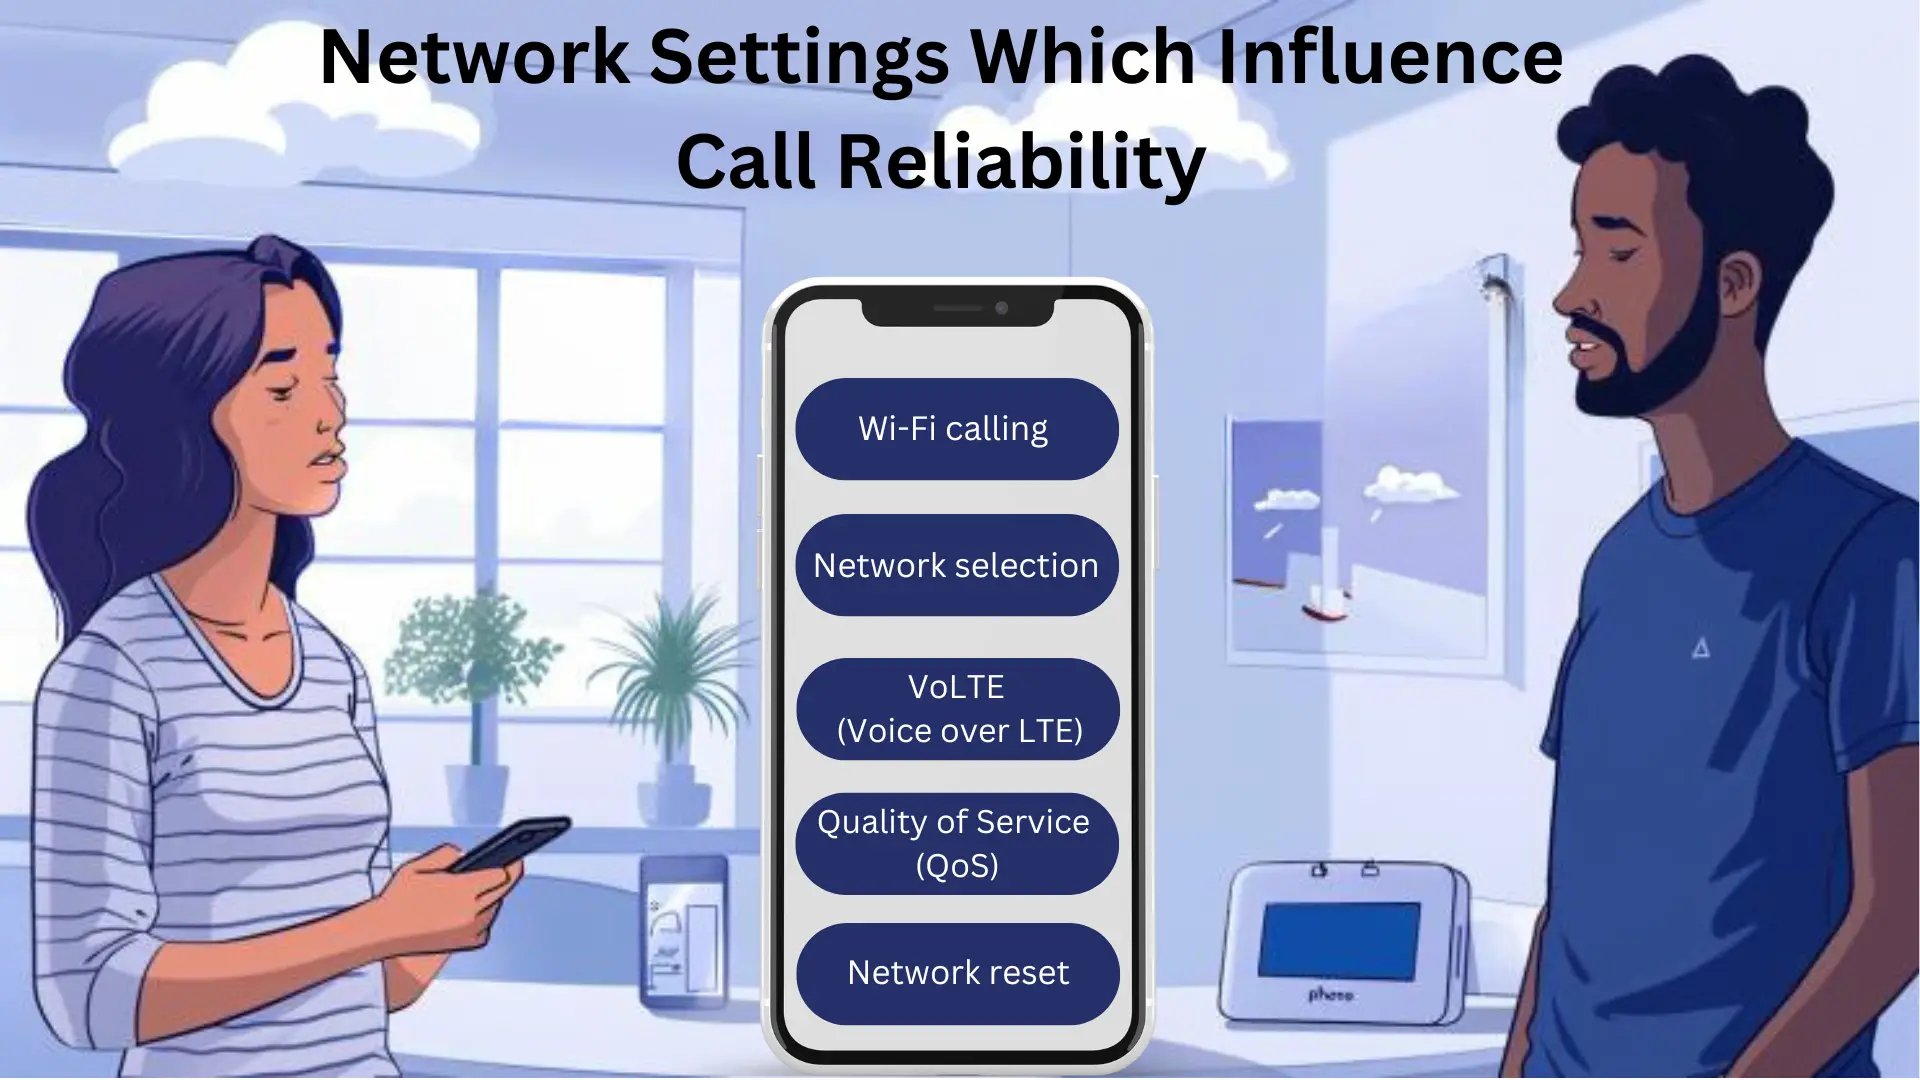 Network Settings Which Influnces Call Reliability